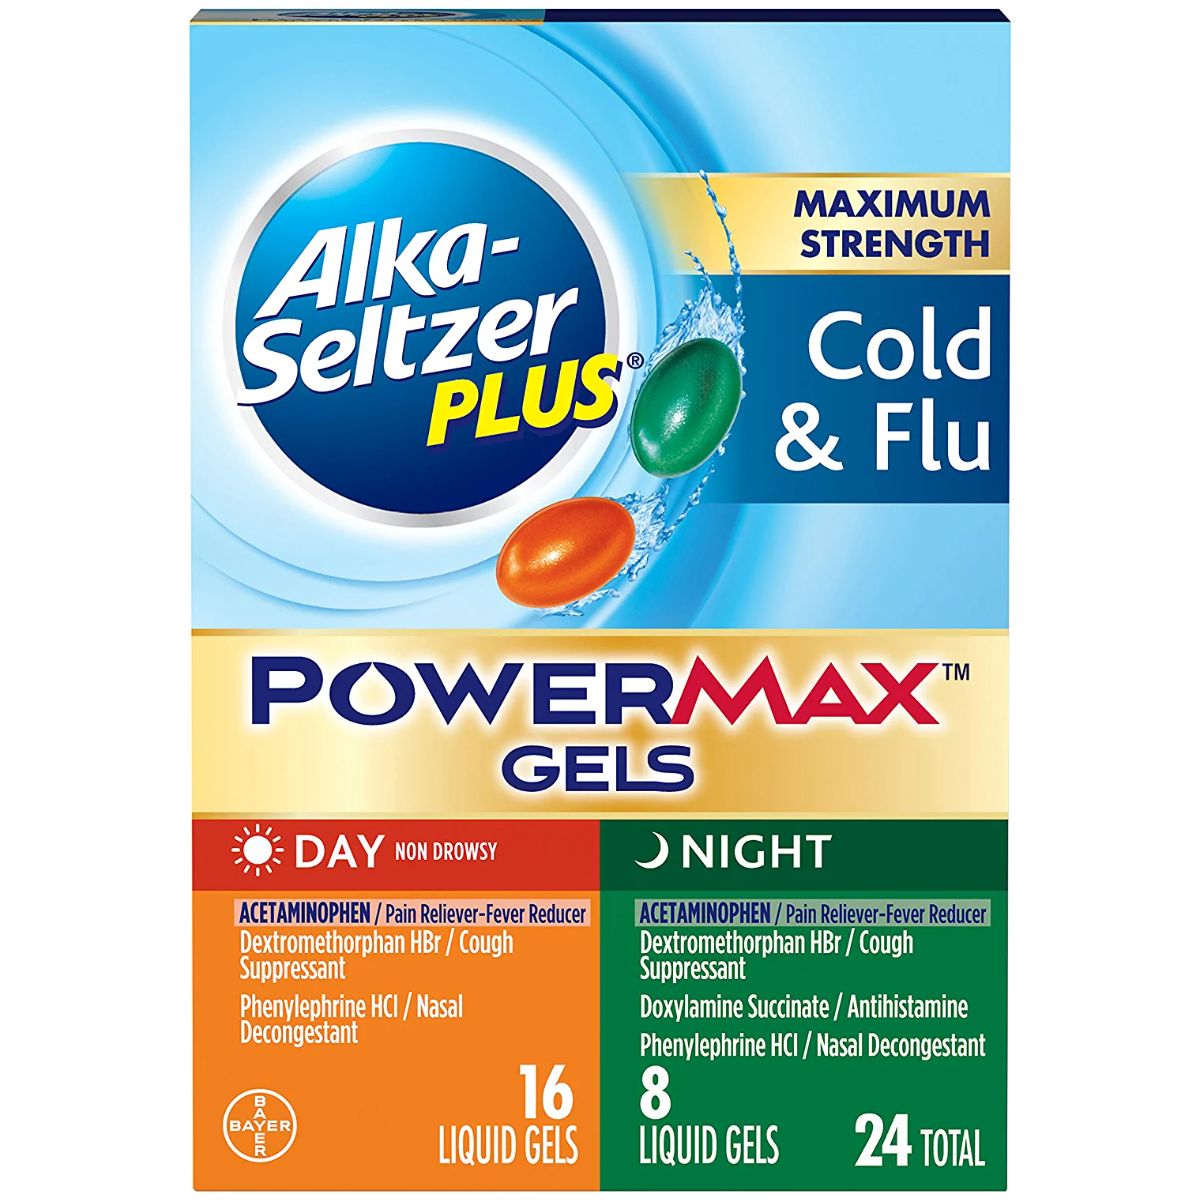 Alka seltzer plus power max gels cold and flu